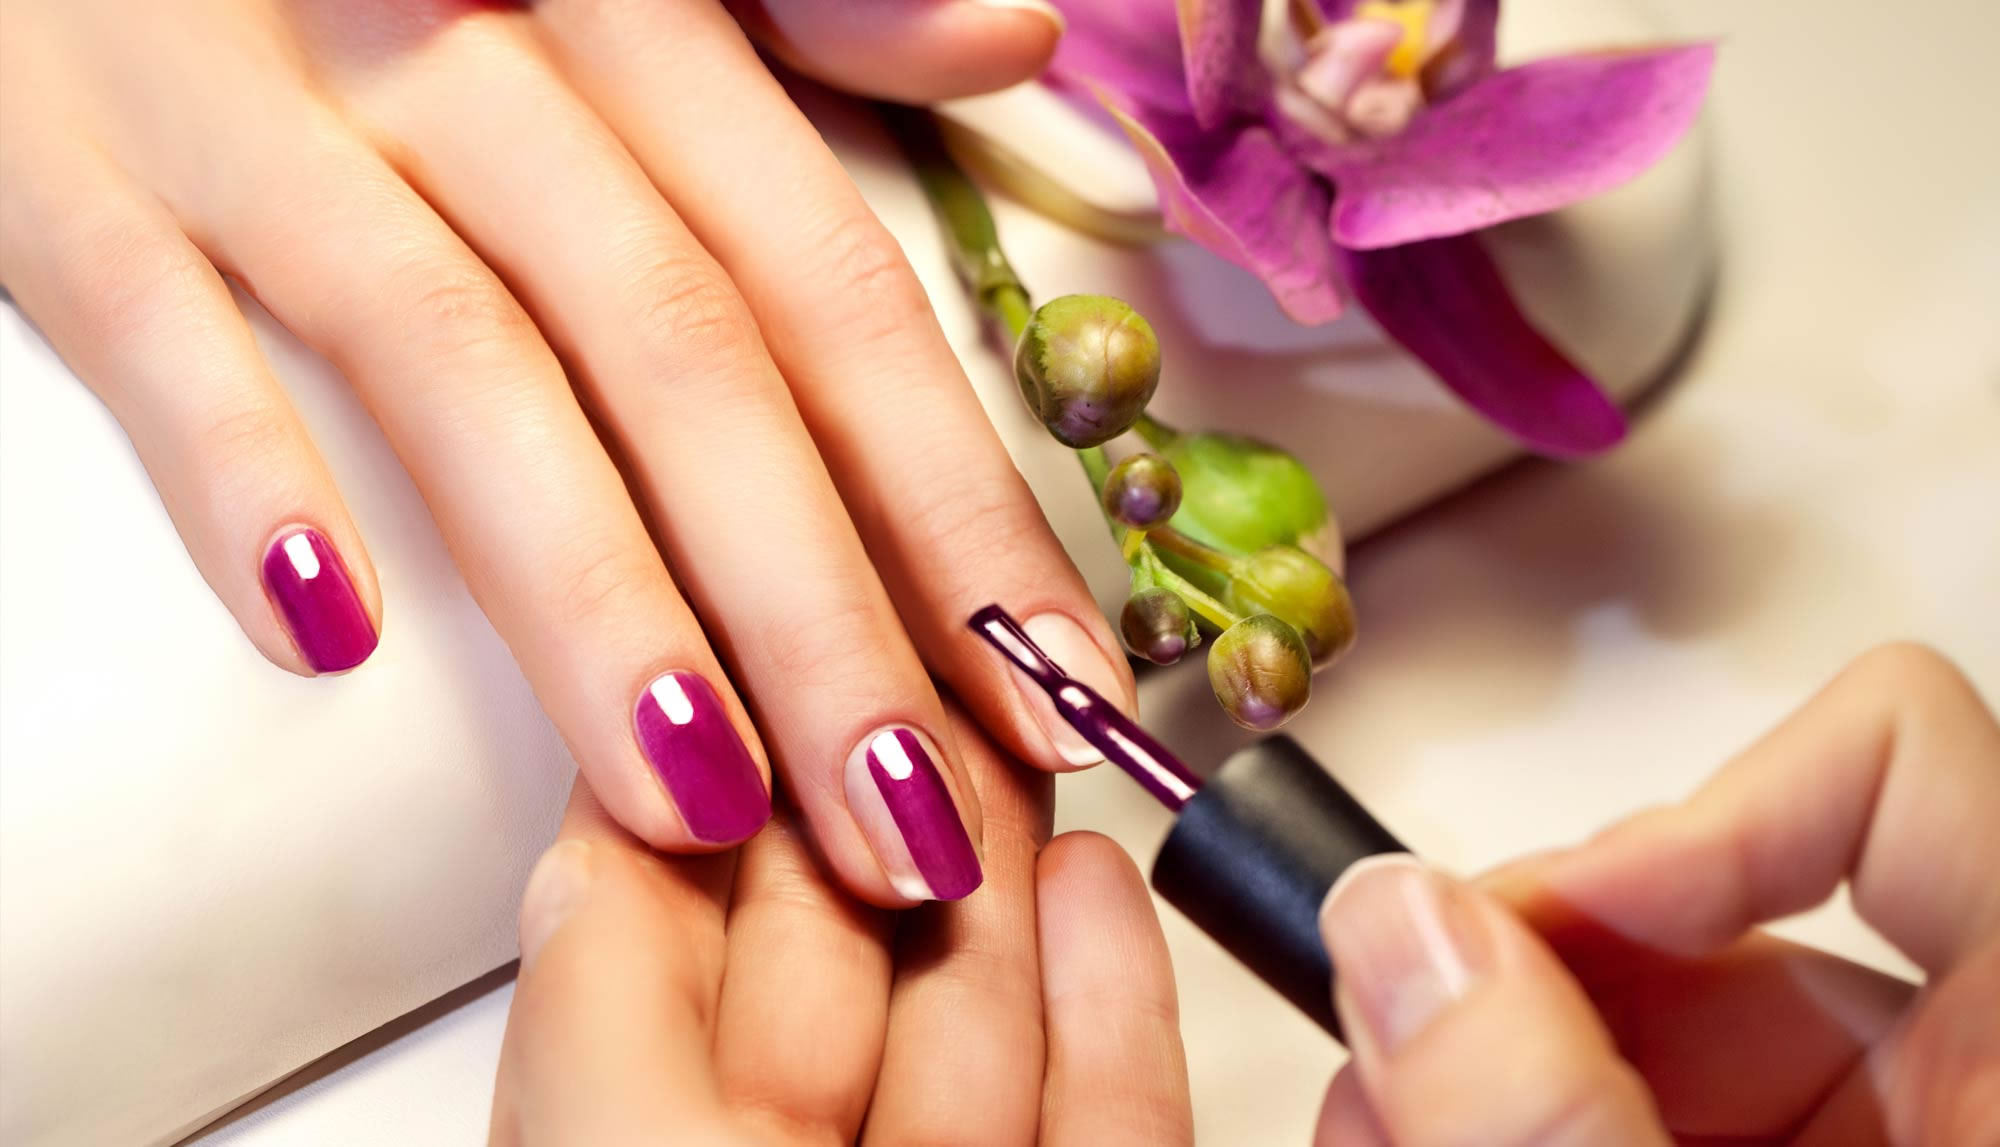 10. DIY Nail Designs for Beginners: Tips and Tricks for At-Home Manicures - wide 3